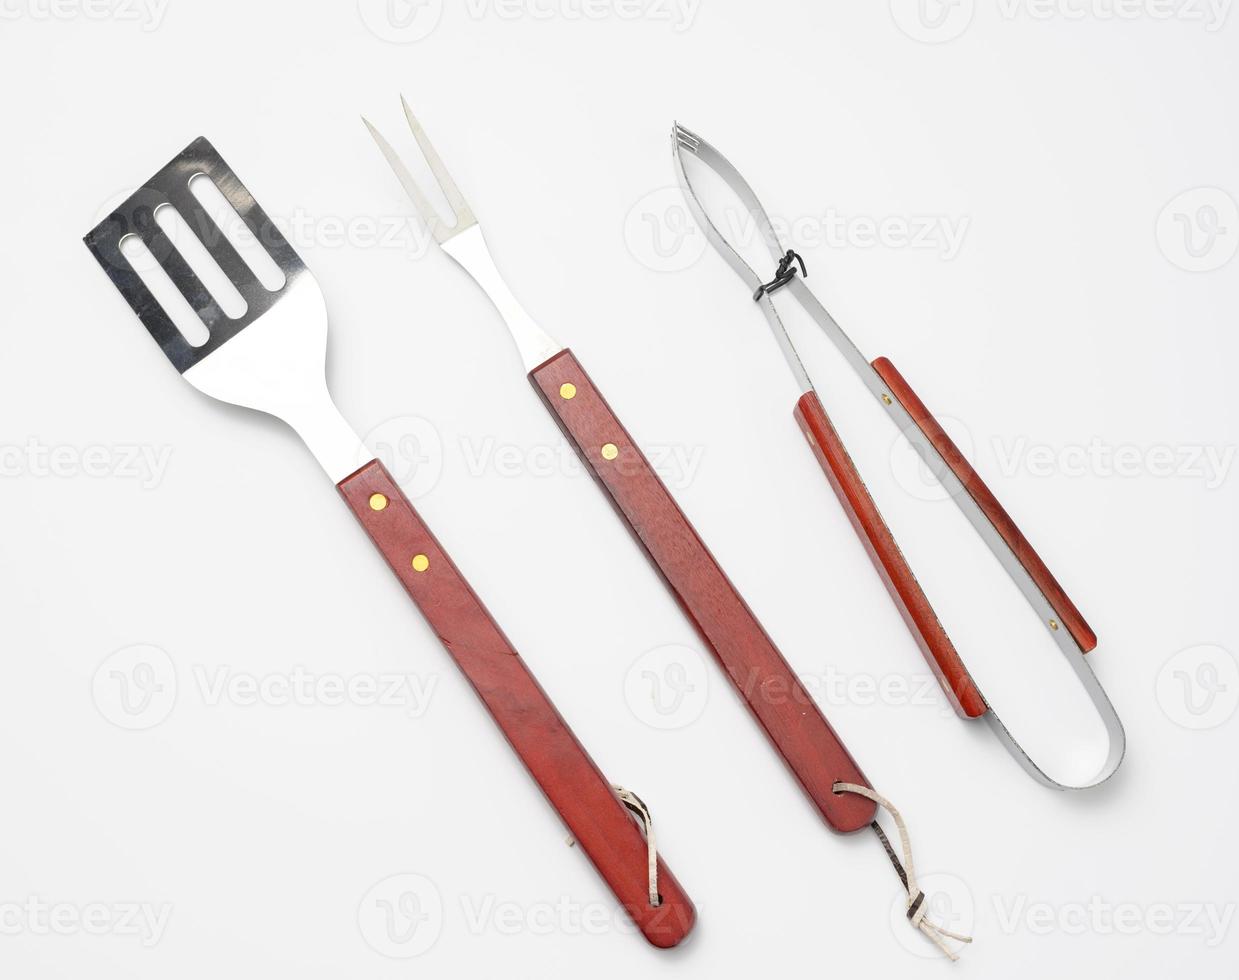 tongs, metal spatula and a fork with a wooden handle on a white background photo